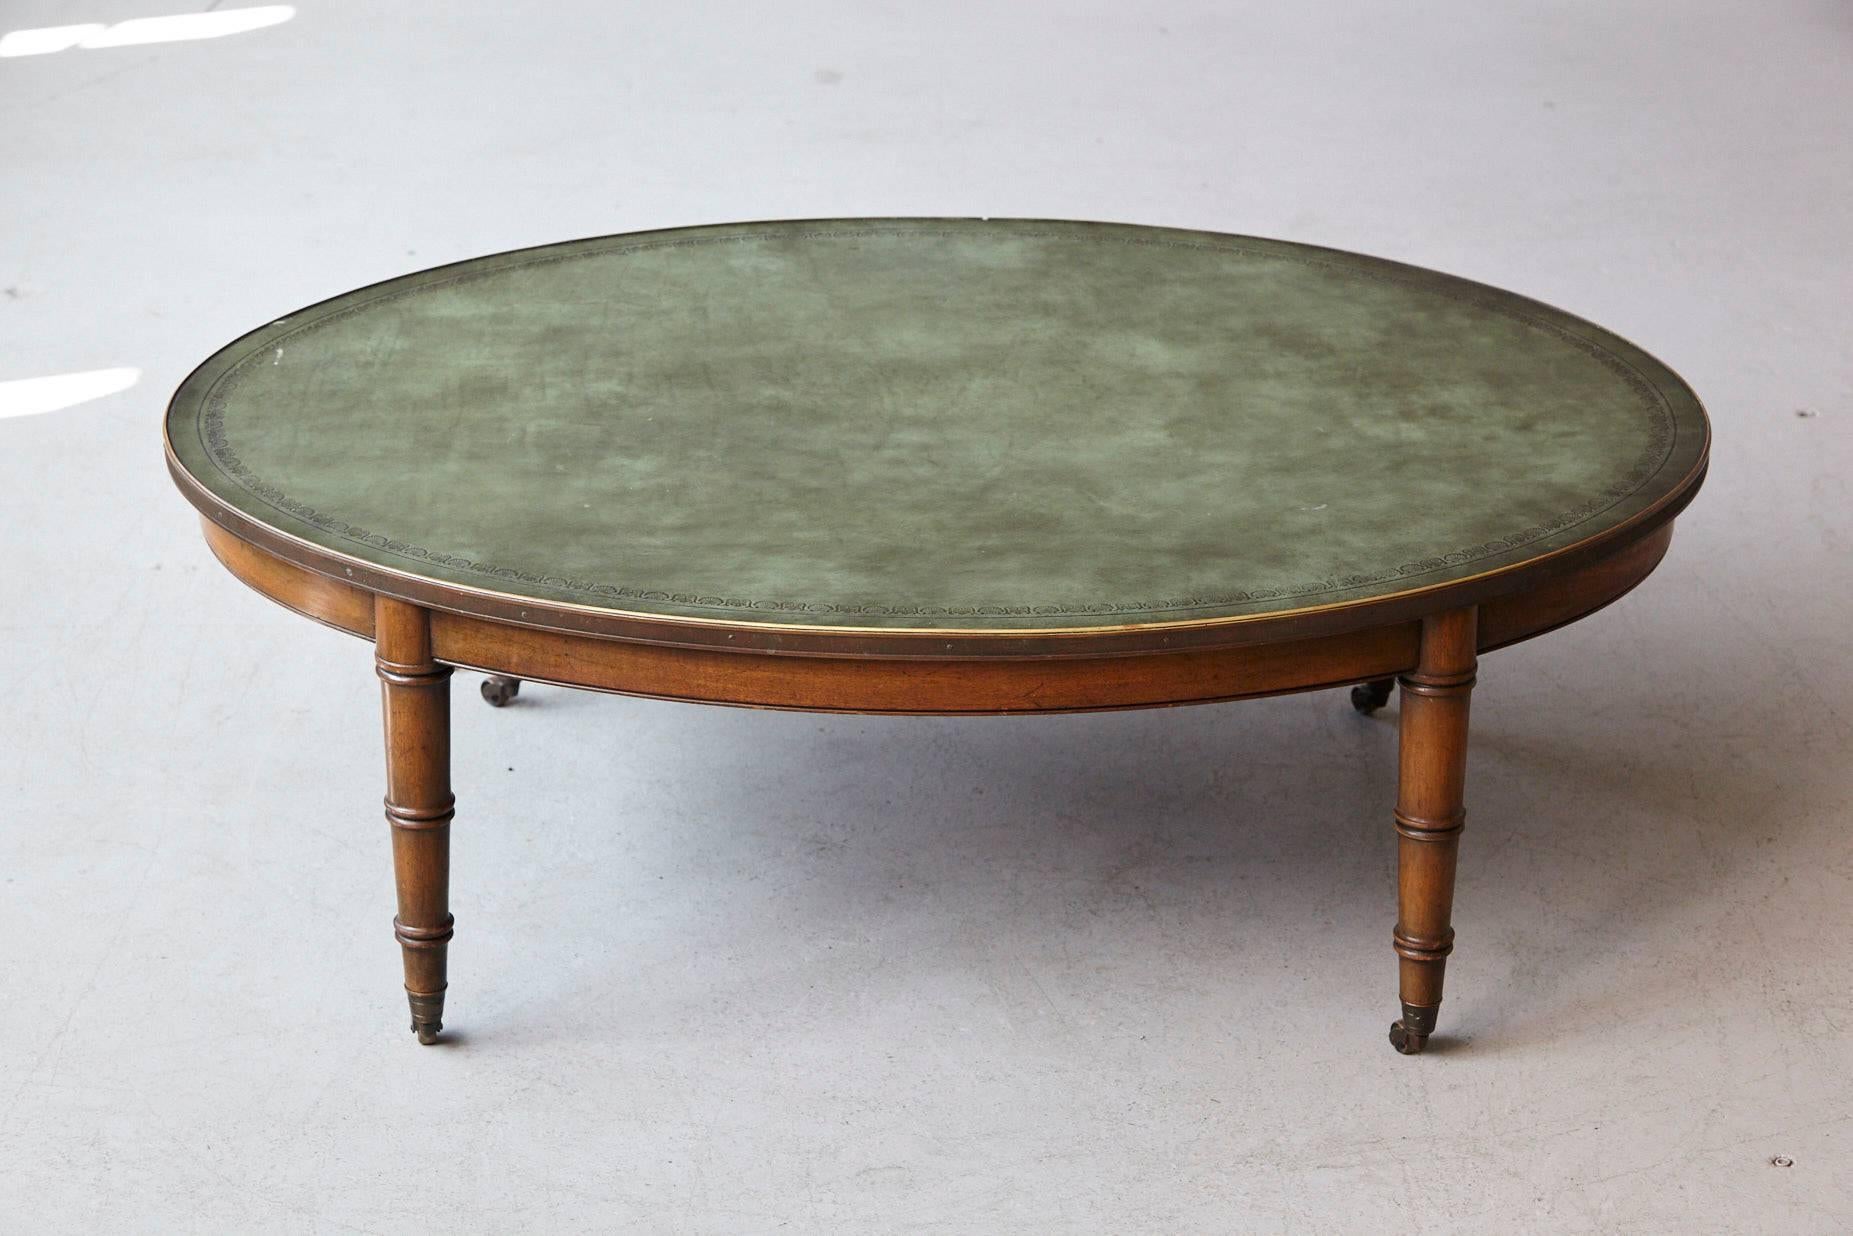 Rare Kittinger oval walnut coffee table with embossed green leather top and brass binding, raised on stylized faux bamboo legs with brass casters.
This table carries the serial number # 1 of the model T347 C.
Some minor scratches to the wood and